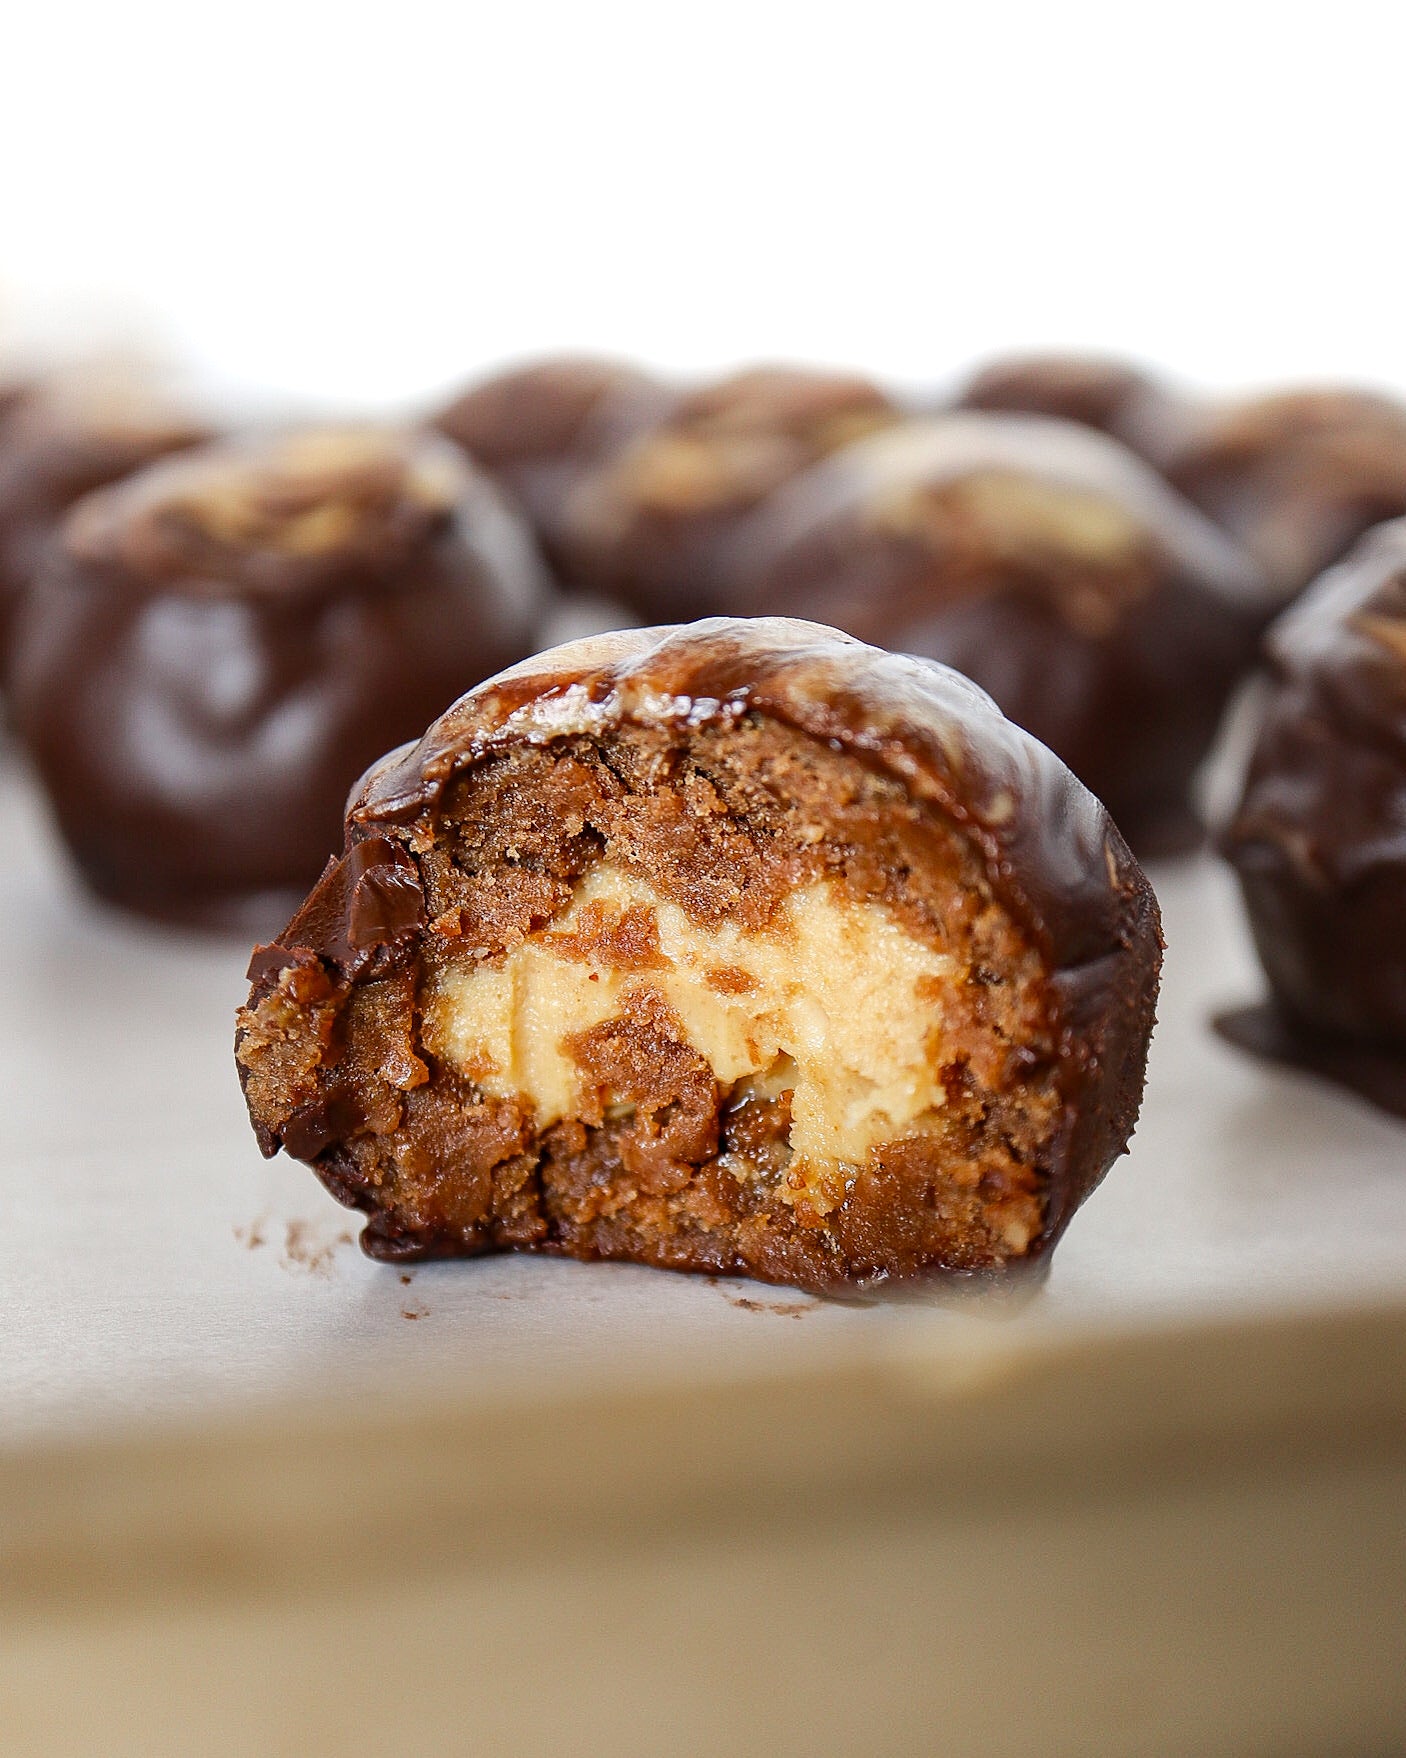 Peanut Butter Chocolate Pea Protein Balls (available in sugar-free chocolate coating)